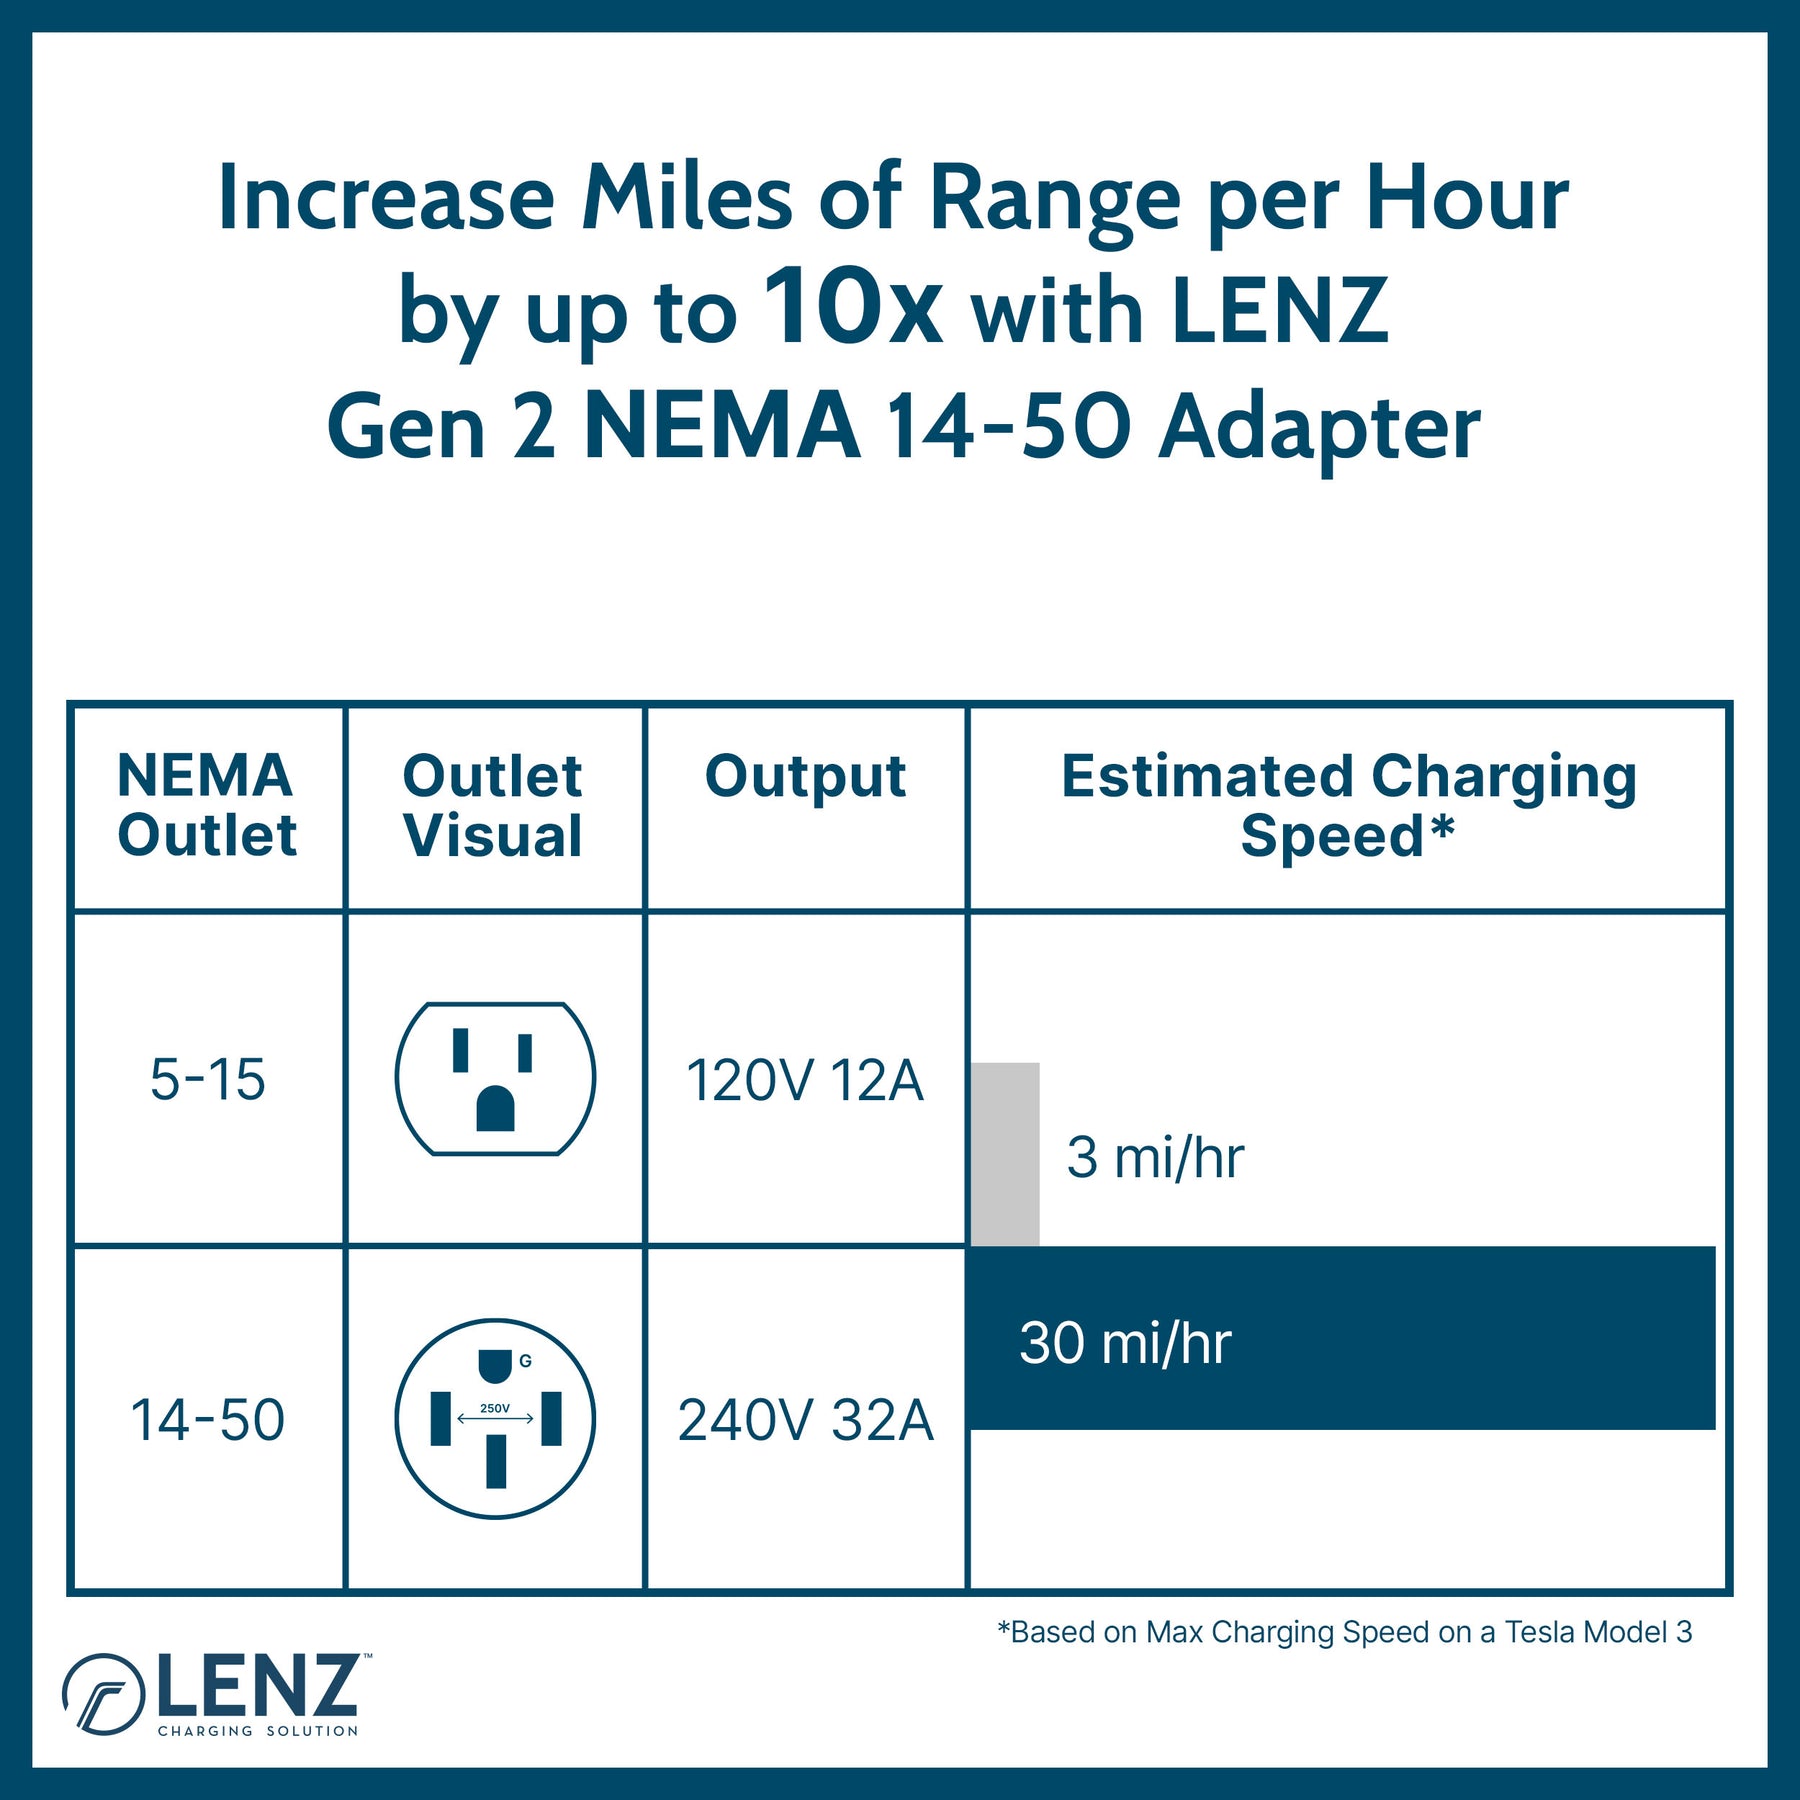 Compared to charging with standard 5-15 NEMA Adapter, charging speed is up to 10x faster with LENZ 14-50 Adapter